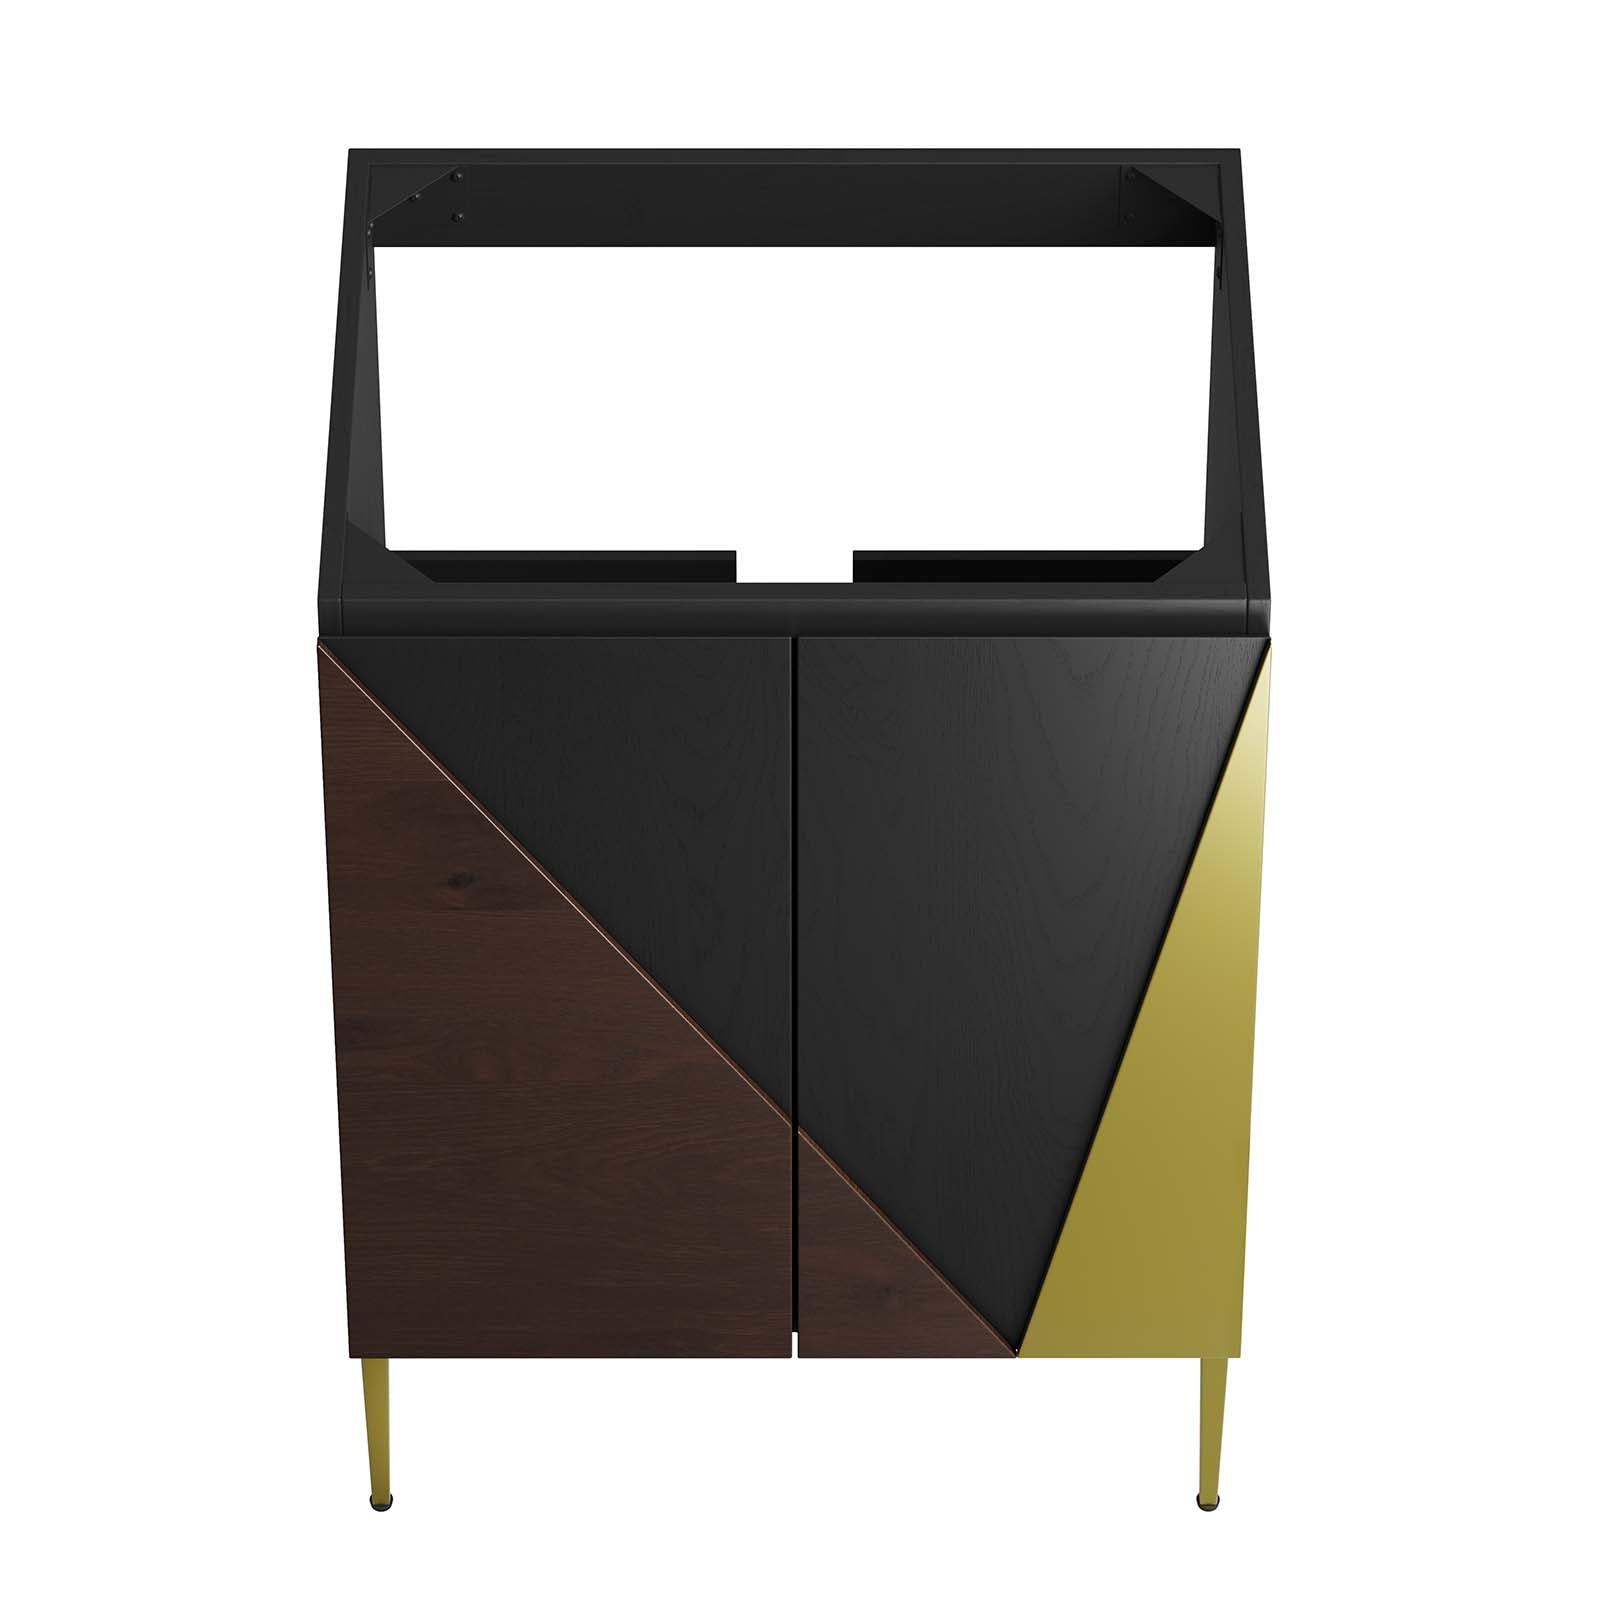 Alchemist 24" Bathroom Vanity Cabinet (Sink Basin Not Included) By Modway - EEI-6142 | Bathroom Accessories | Modway - 4